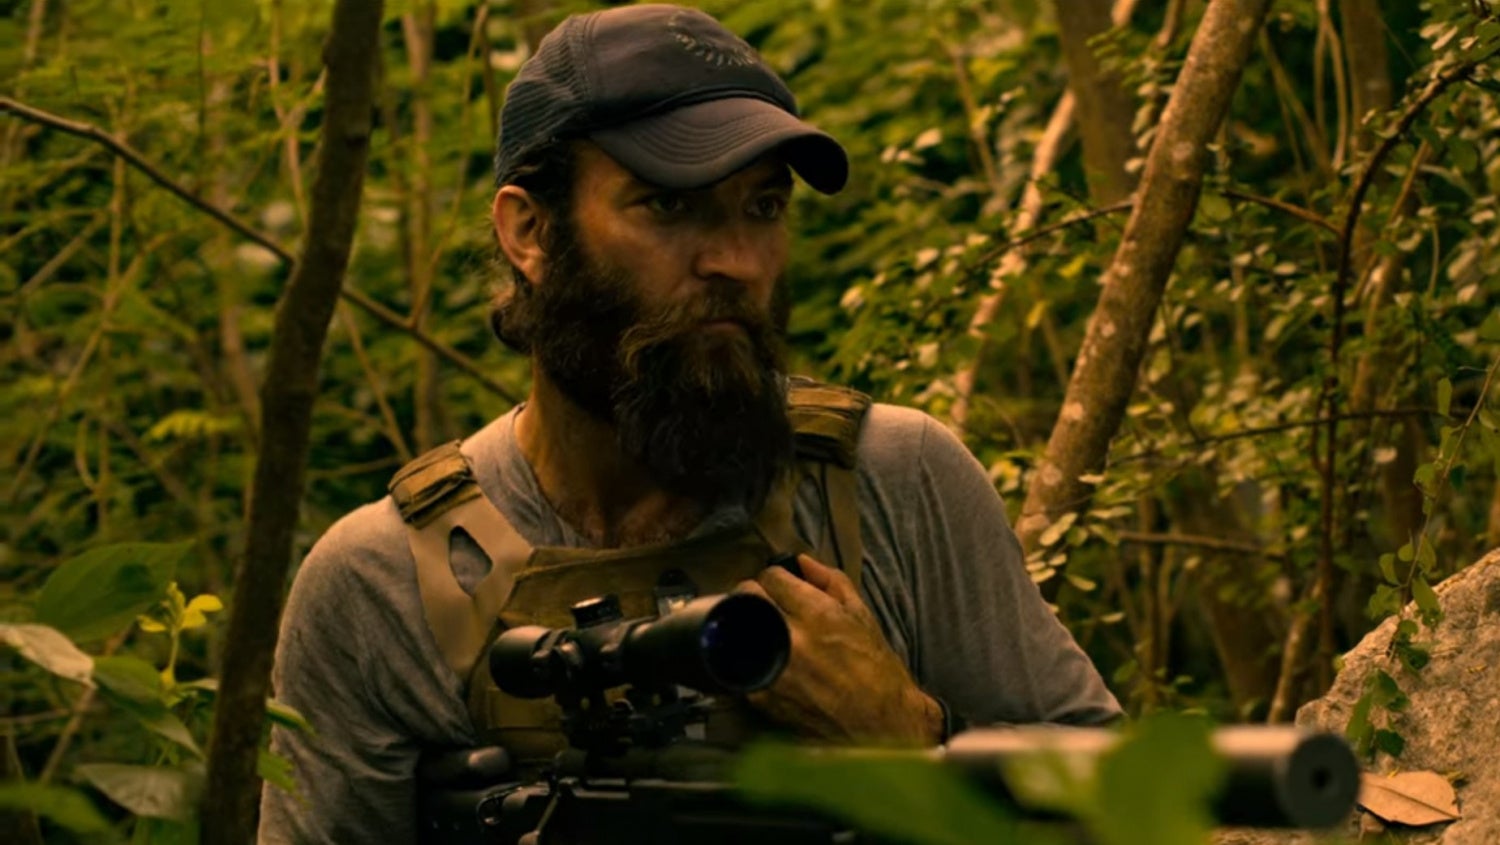 Sam Hargrave, director of "Extraction", also played a small role of a sniper in the beginning of the movie